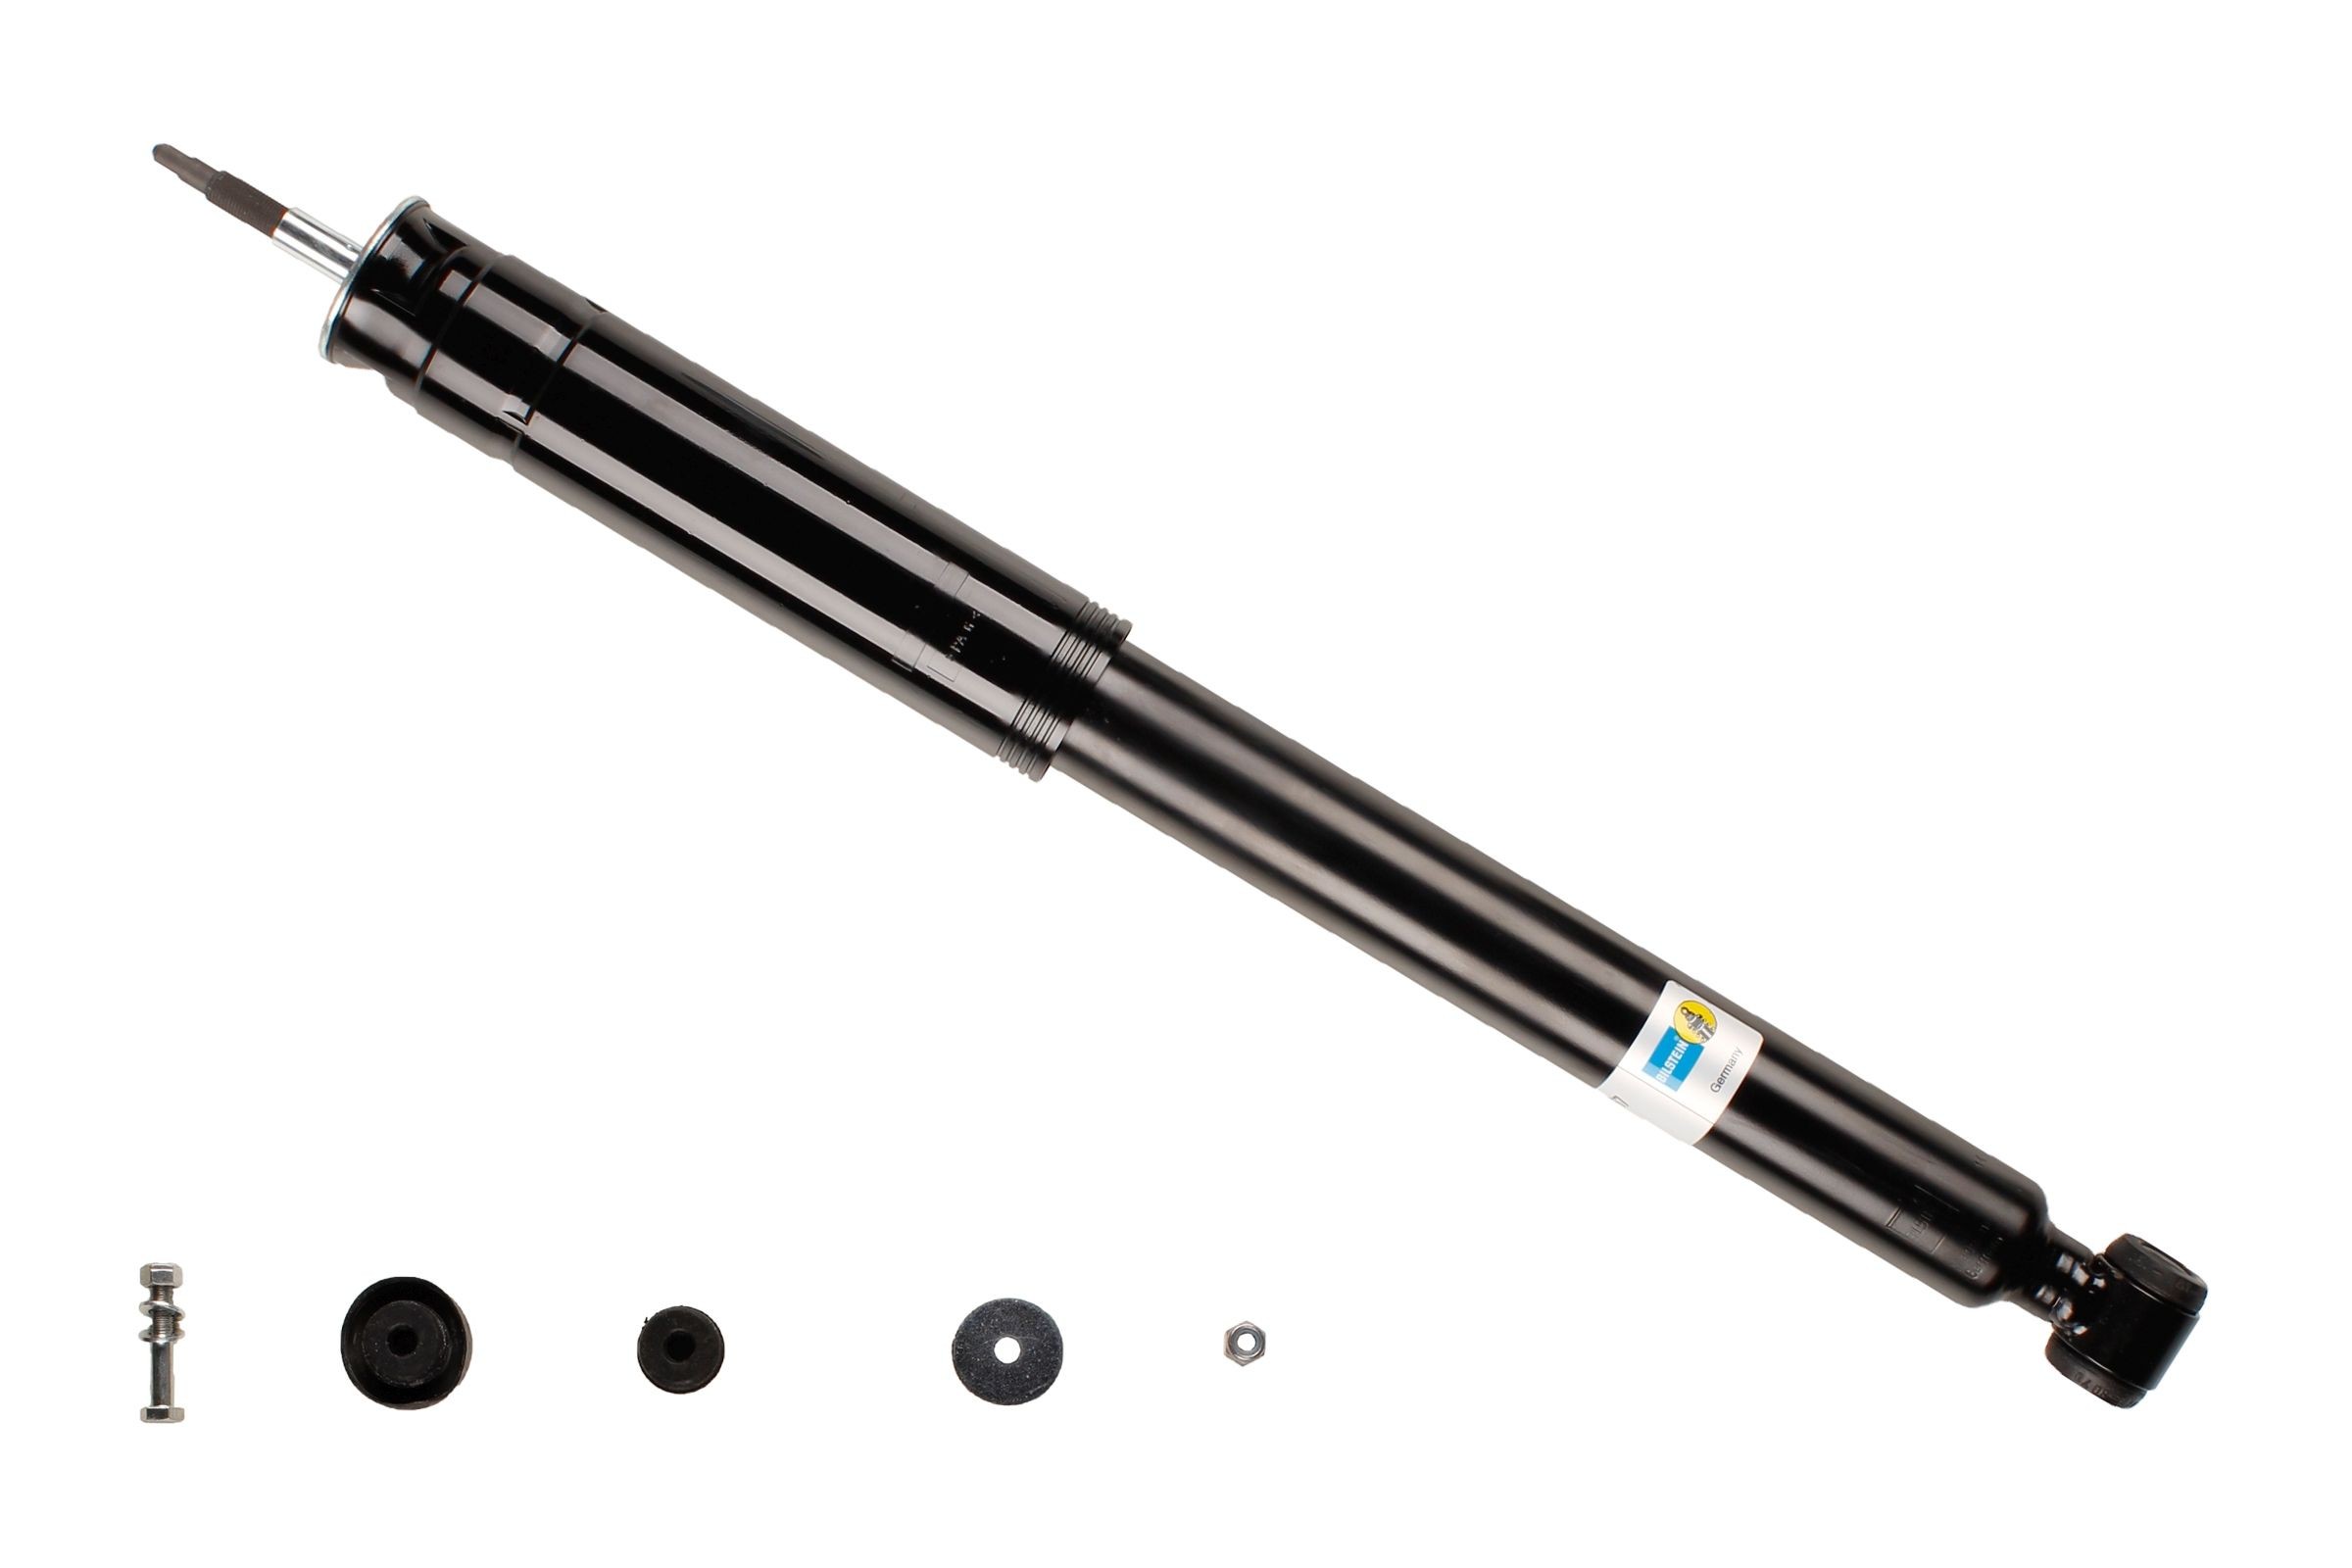 BE3-A055 BILSTEIN - B4 OE Replacement Rear Axle, Gas Pressure, Monotube, Absorber does not carry a spring, Bottom eye, Top pin Shocks 24-100557 buy